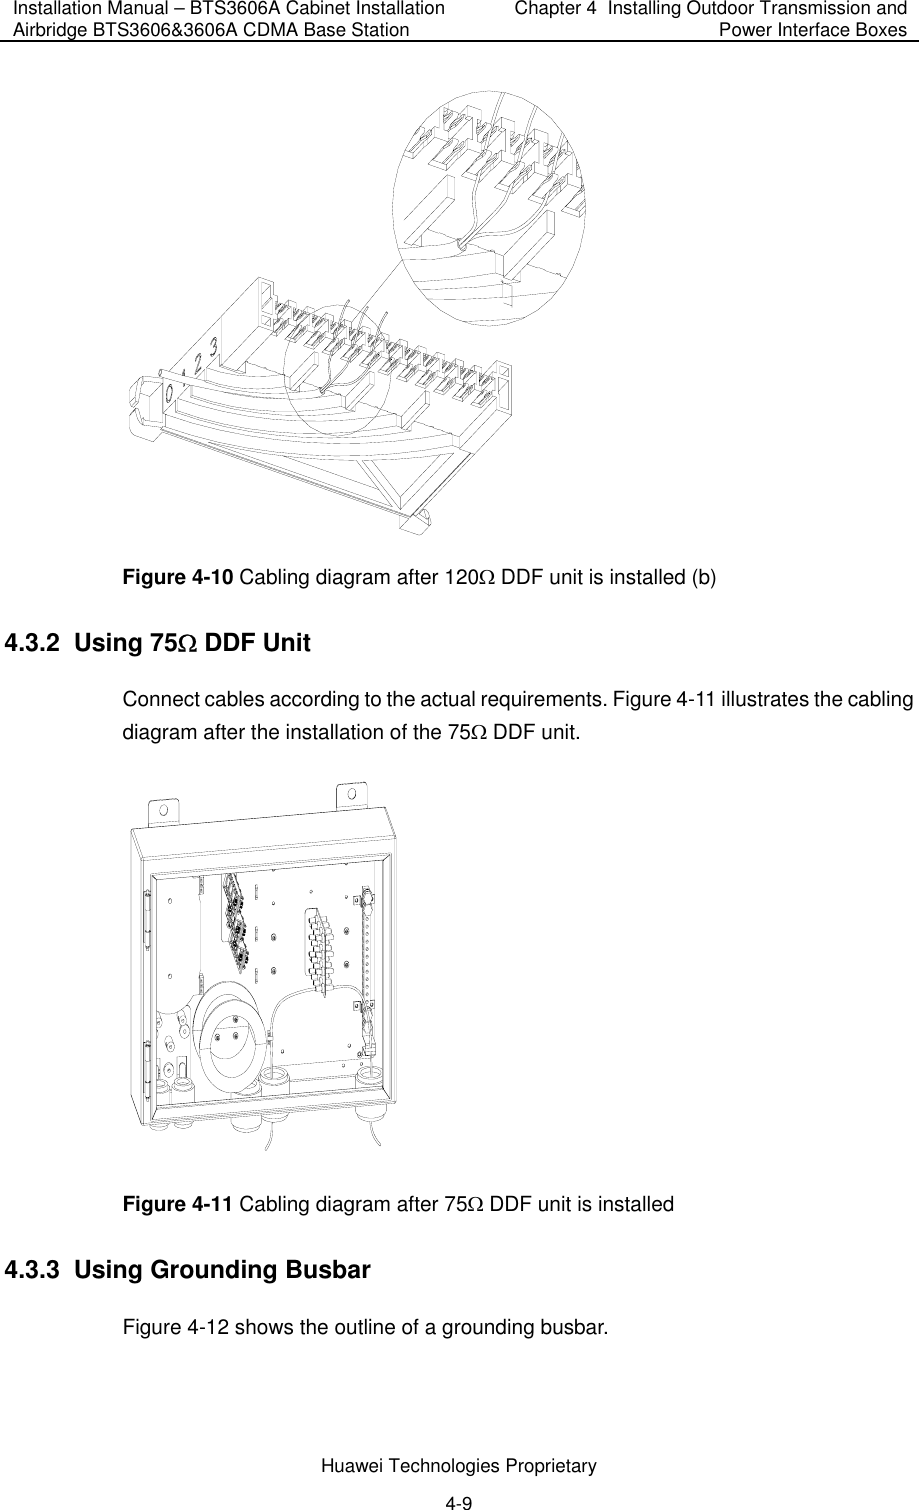 Installation Manual – BTS3606A Cabinet Installation Airbridge BTS3606&amp;3606A CDMA Base Station  Chapter 4  Installing Outdoor Transmission and Power Interface Boxes  Huawei Technologies Proprietary 4-9  Figure 4-10 Cabling diagram after 120Ω DDF unit is installed (b) 4.3.2  Using 75Ω DDF Unit Connect cables according to the actual requirements. Figure 4-11 illustrates the cabling diagram after the installation of the 75Ω DDF unit.  Figure 4-11 Cabling diagram after 75Ω DDF unit is installed 4.3.3  Using Grounding Busbar Figure 4-12 shows the outline of a grounding busbar. 